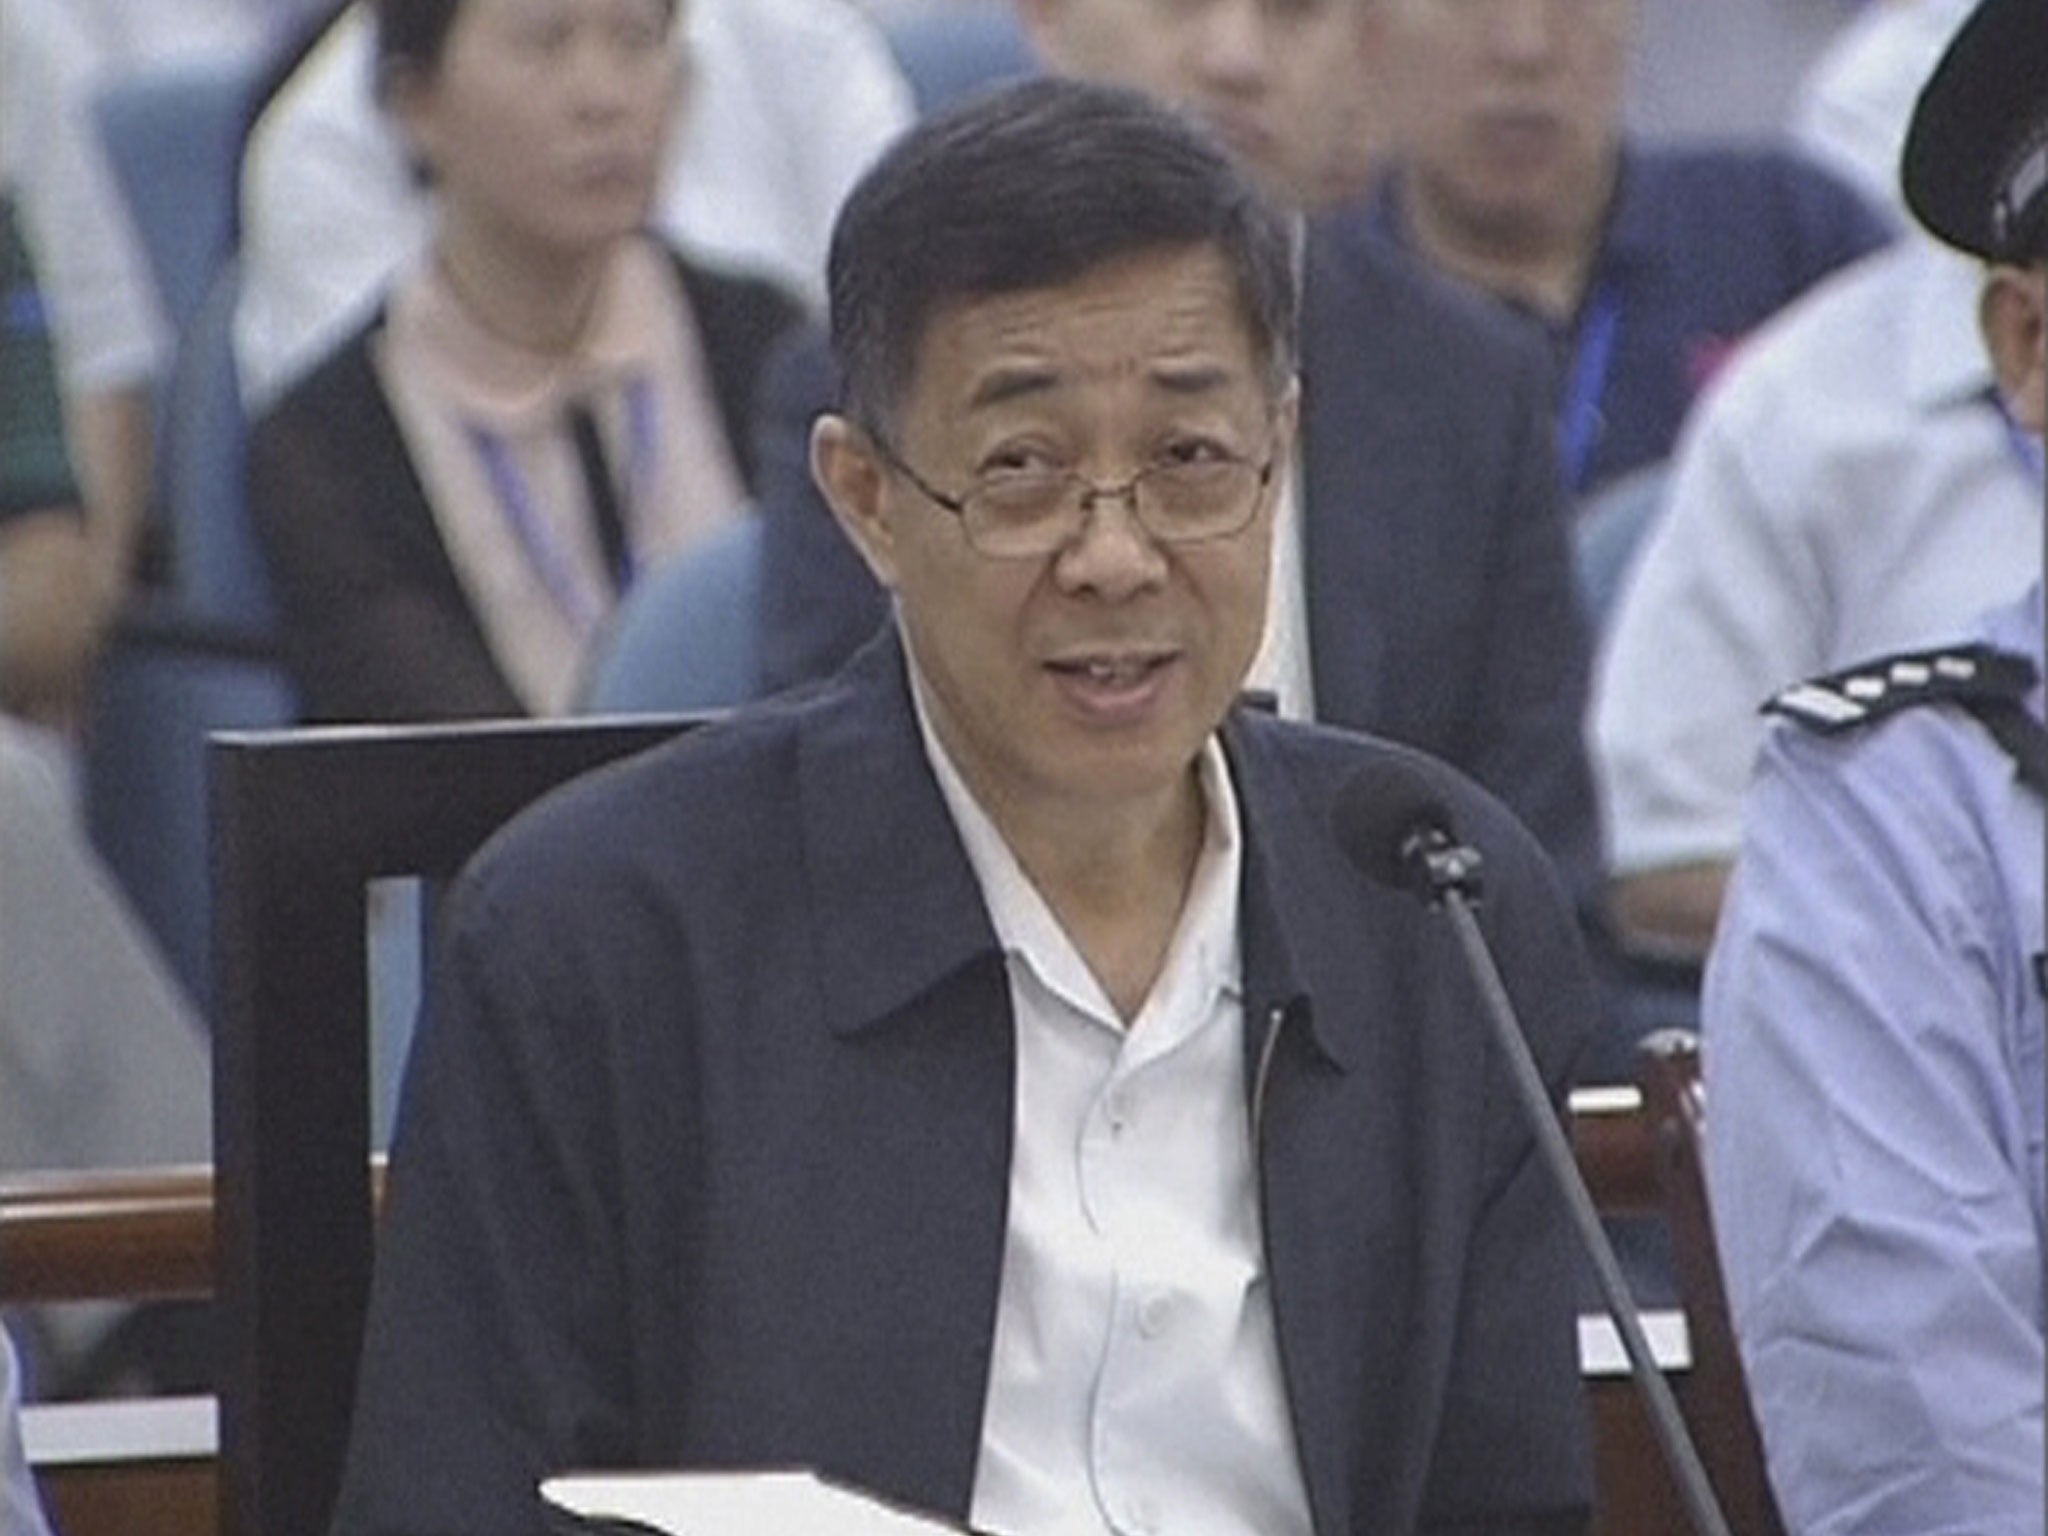 On trial: Disgraced Bo Xilai addresses the court in Jinan